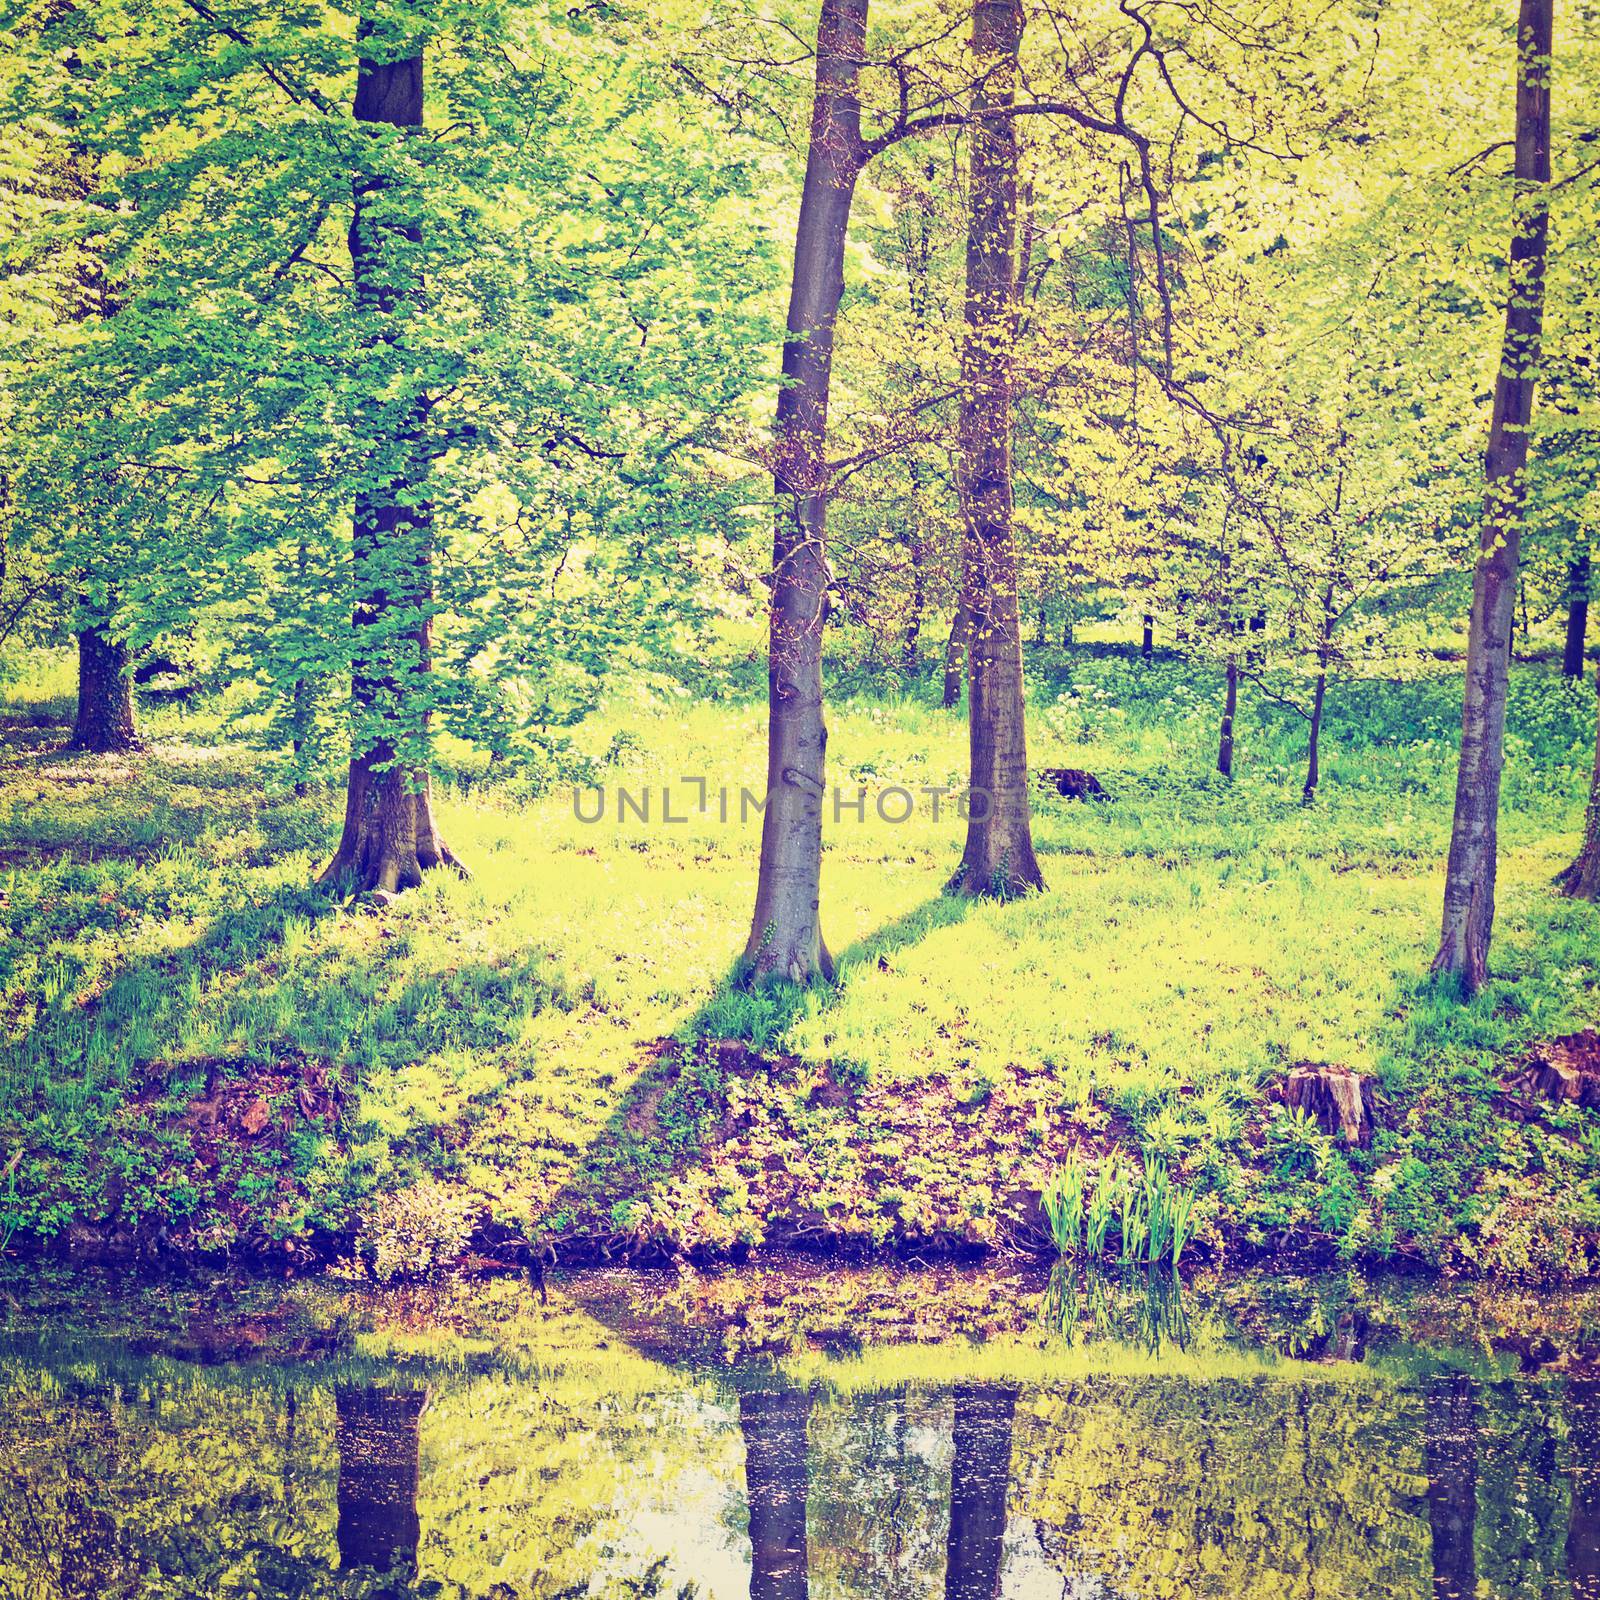 Greenwood on the Canal Bank in the Netherlands, Instagram Effect